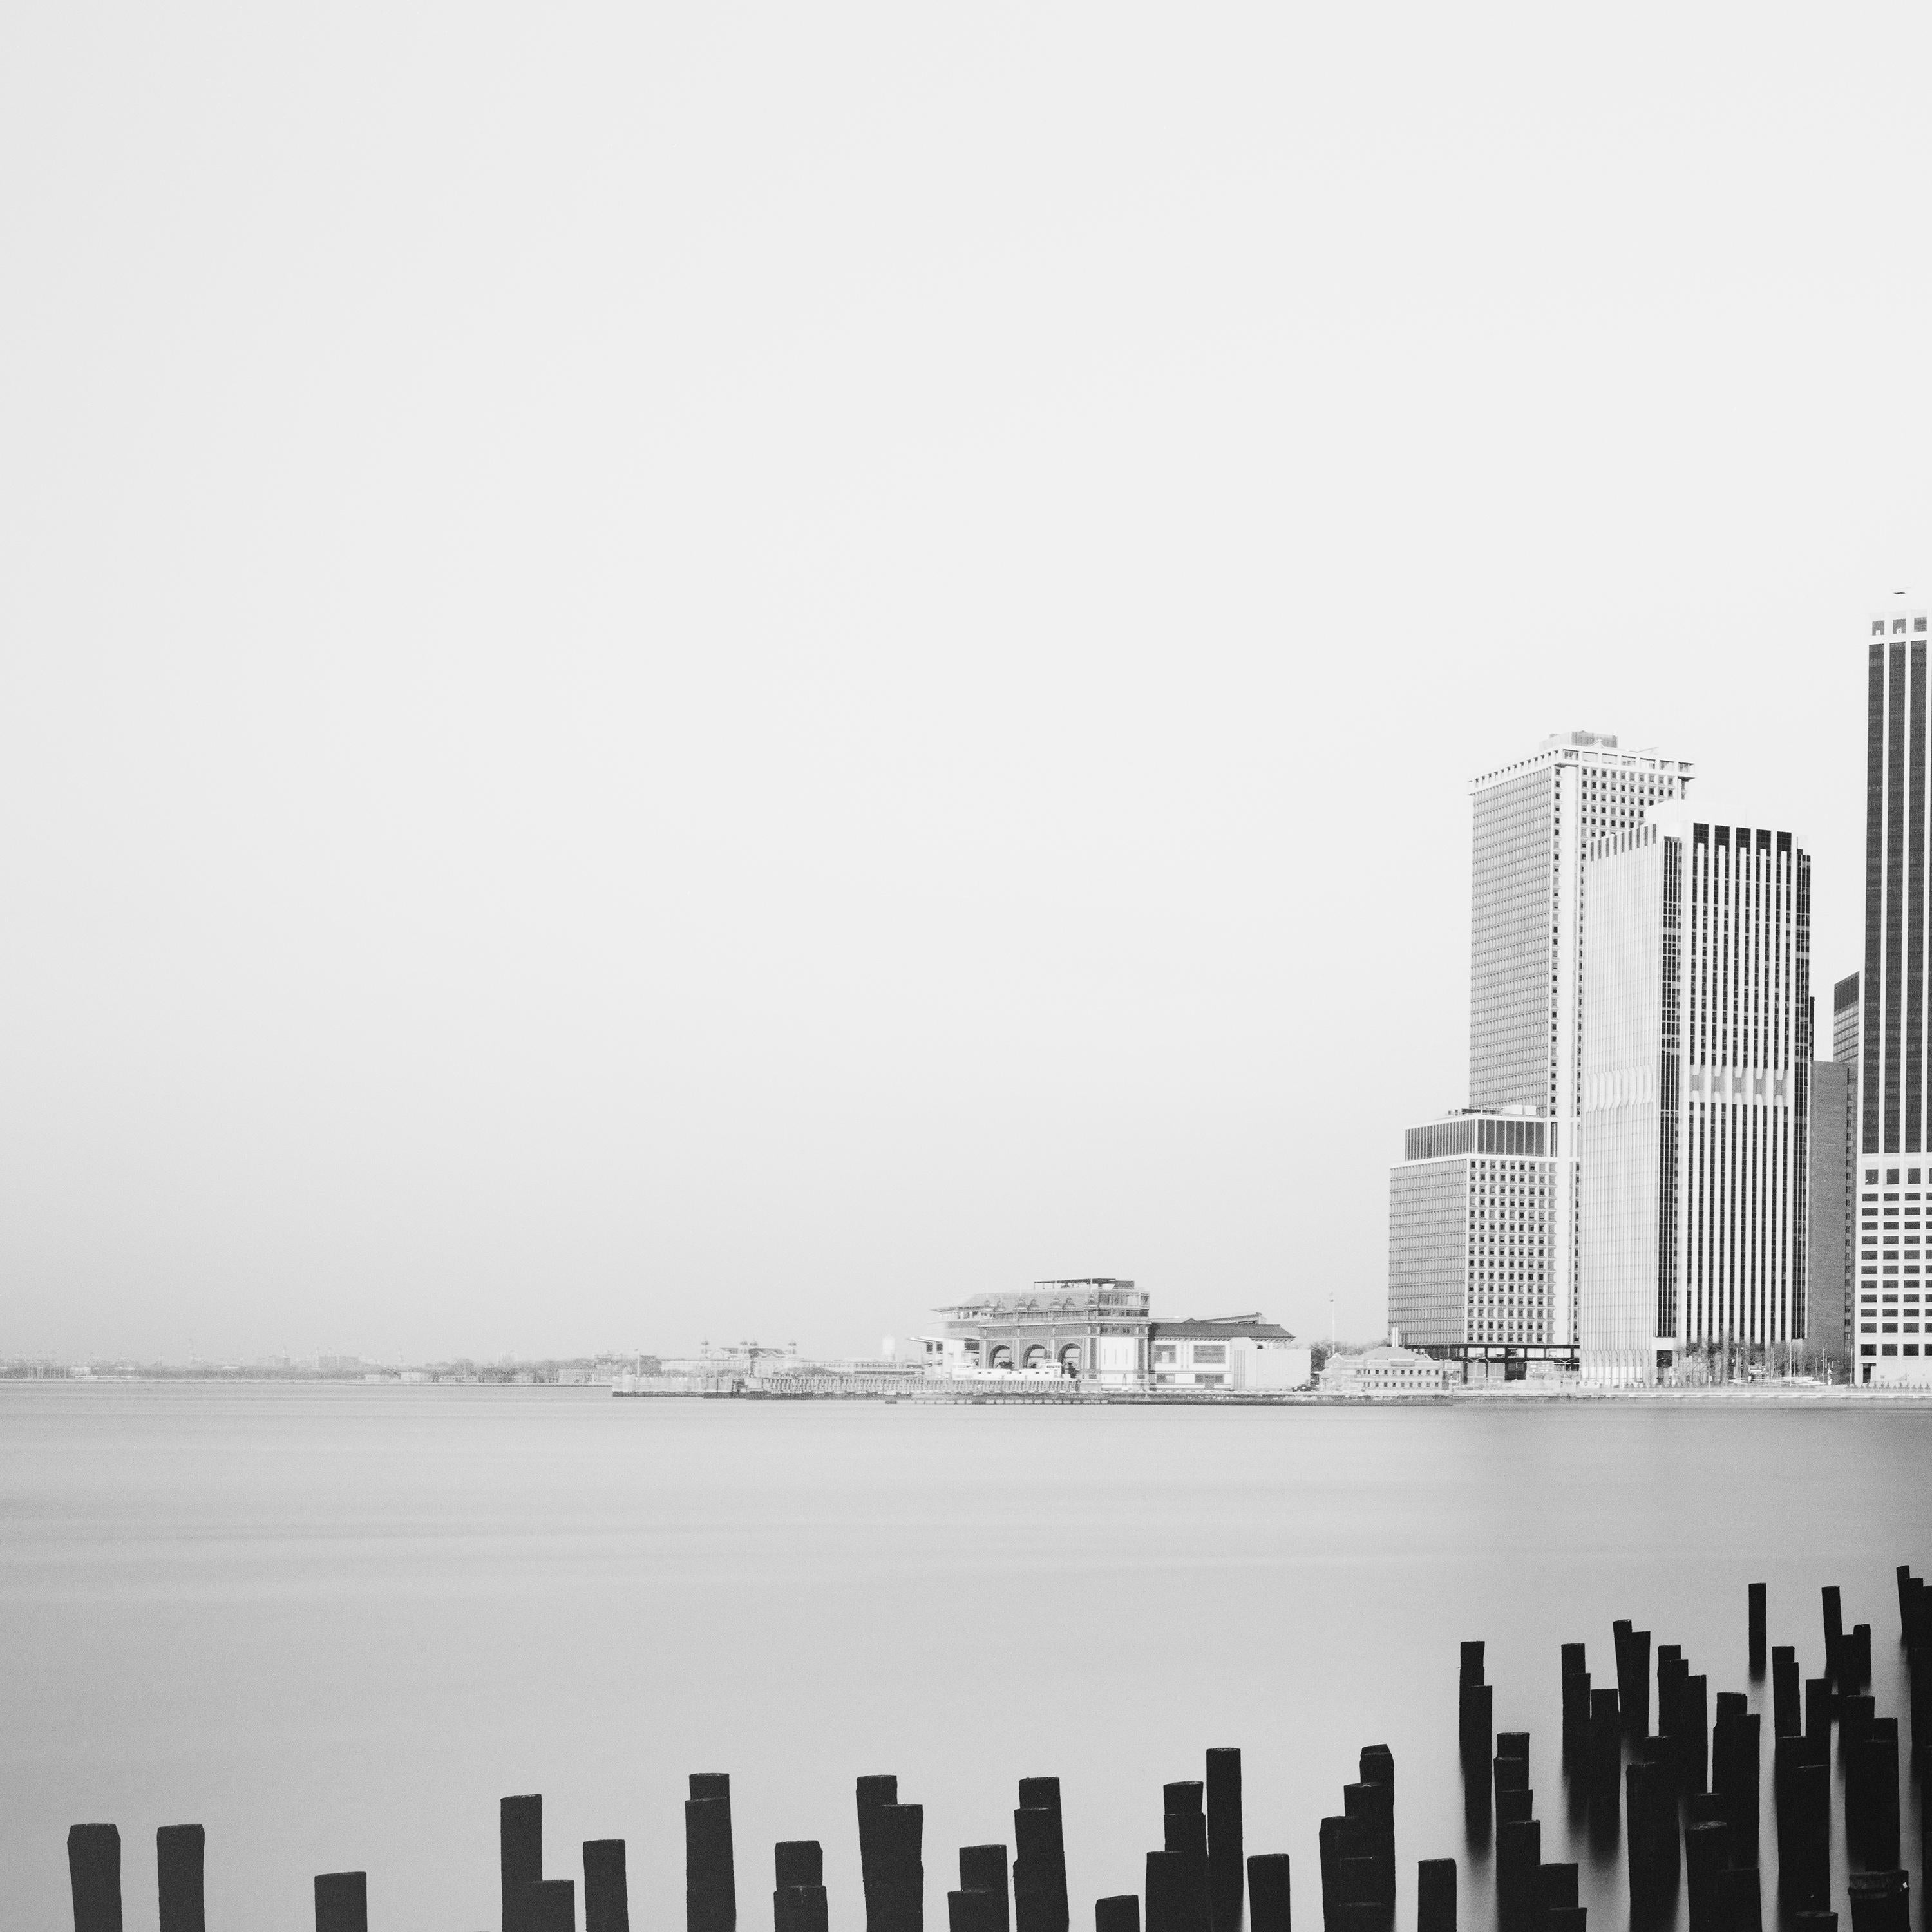 Black and white fine art long exposure waterscape - landscape photography. Manhattan skyline with breakwater in foreground, New York city, USA. Archival pigment ink print as part of a limited edition of 9. All Gerald Berghammer prints are made to